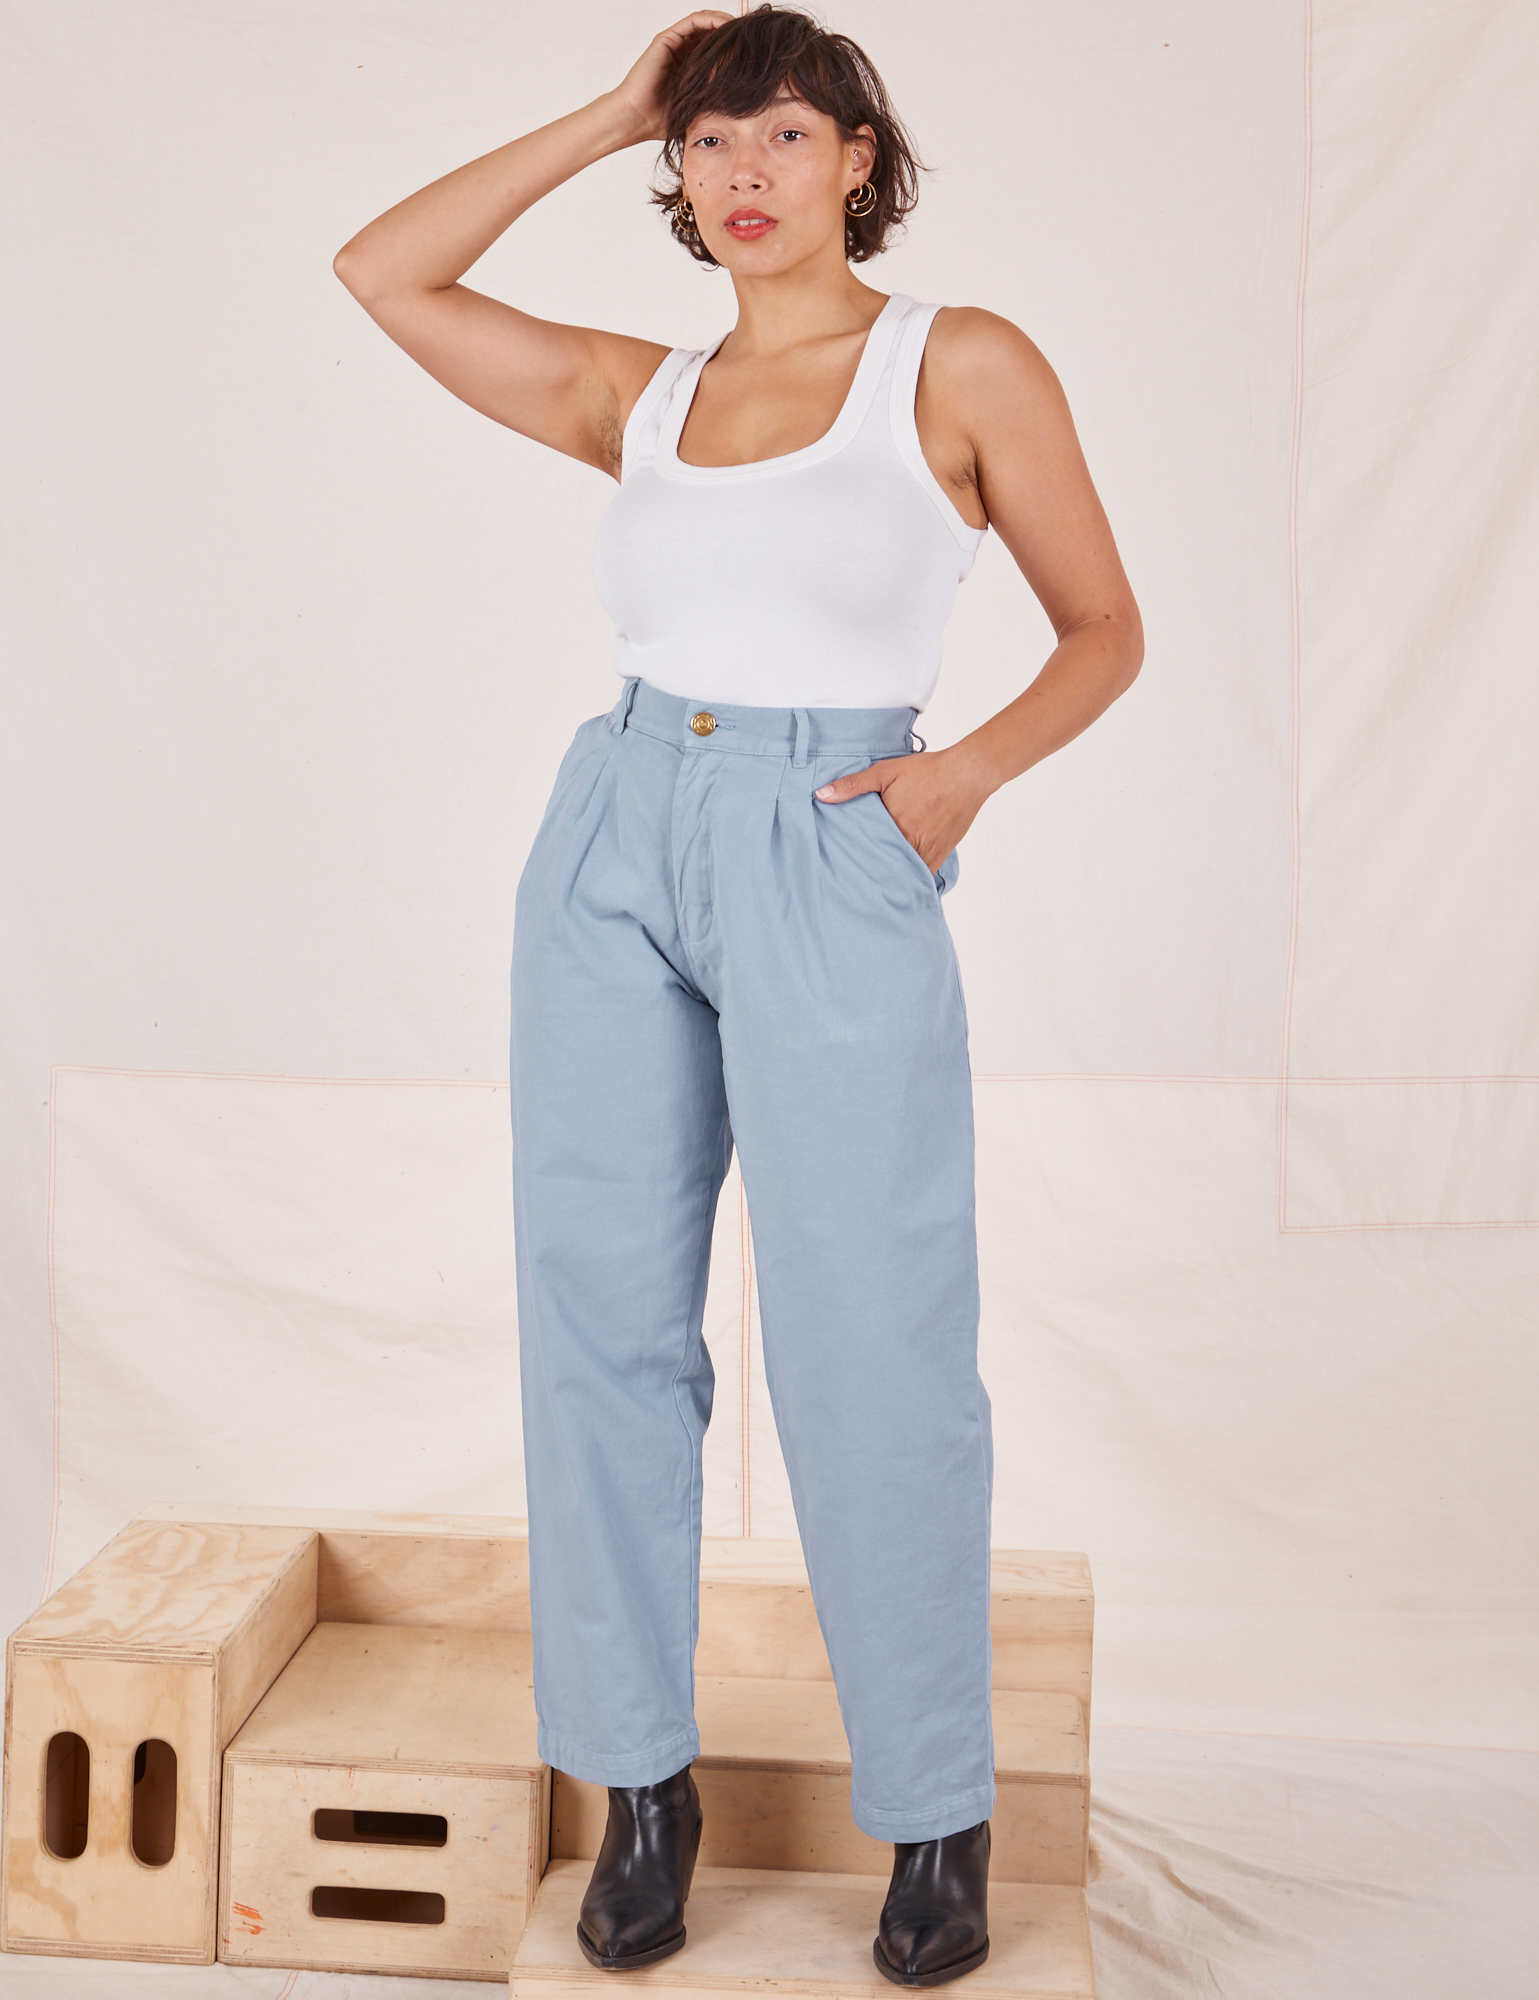 Tiara is 5&#39;4&quot; and wearing XS Heavyweight Trousers in Periwinkle paired with Cropped Tank Top in vintage tee off-white